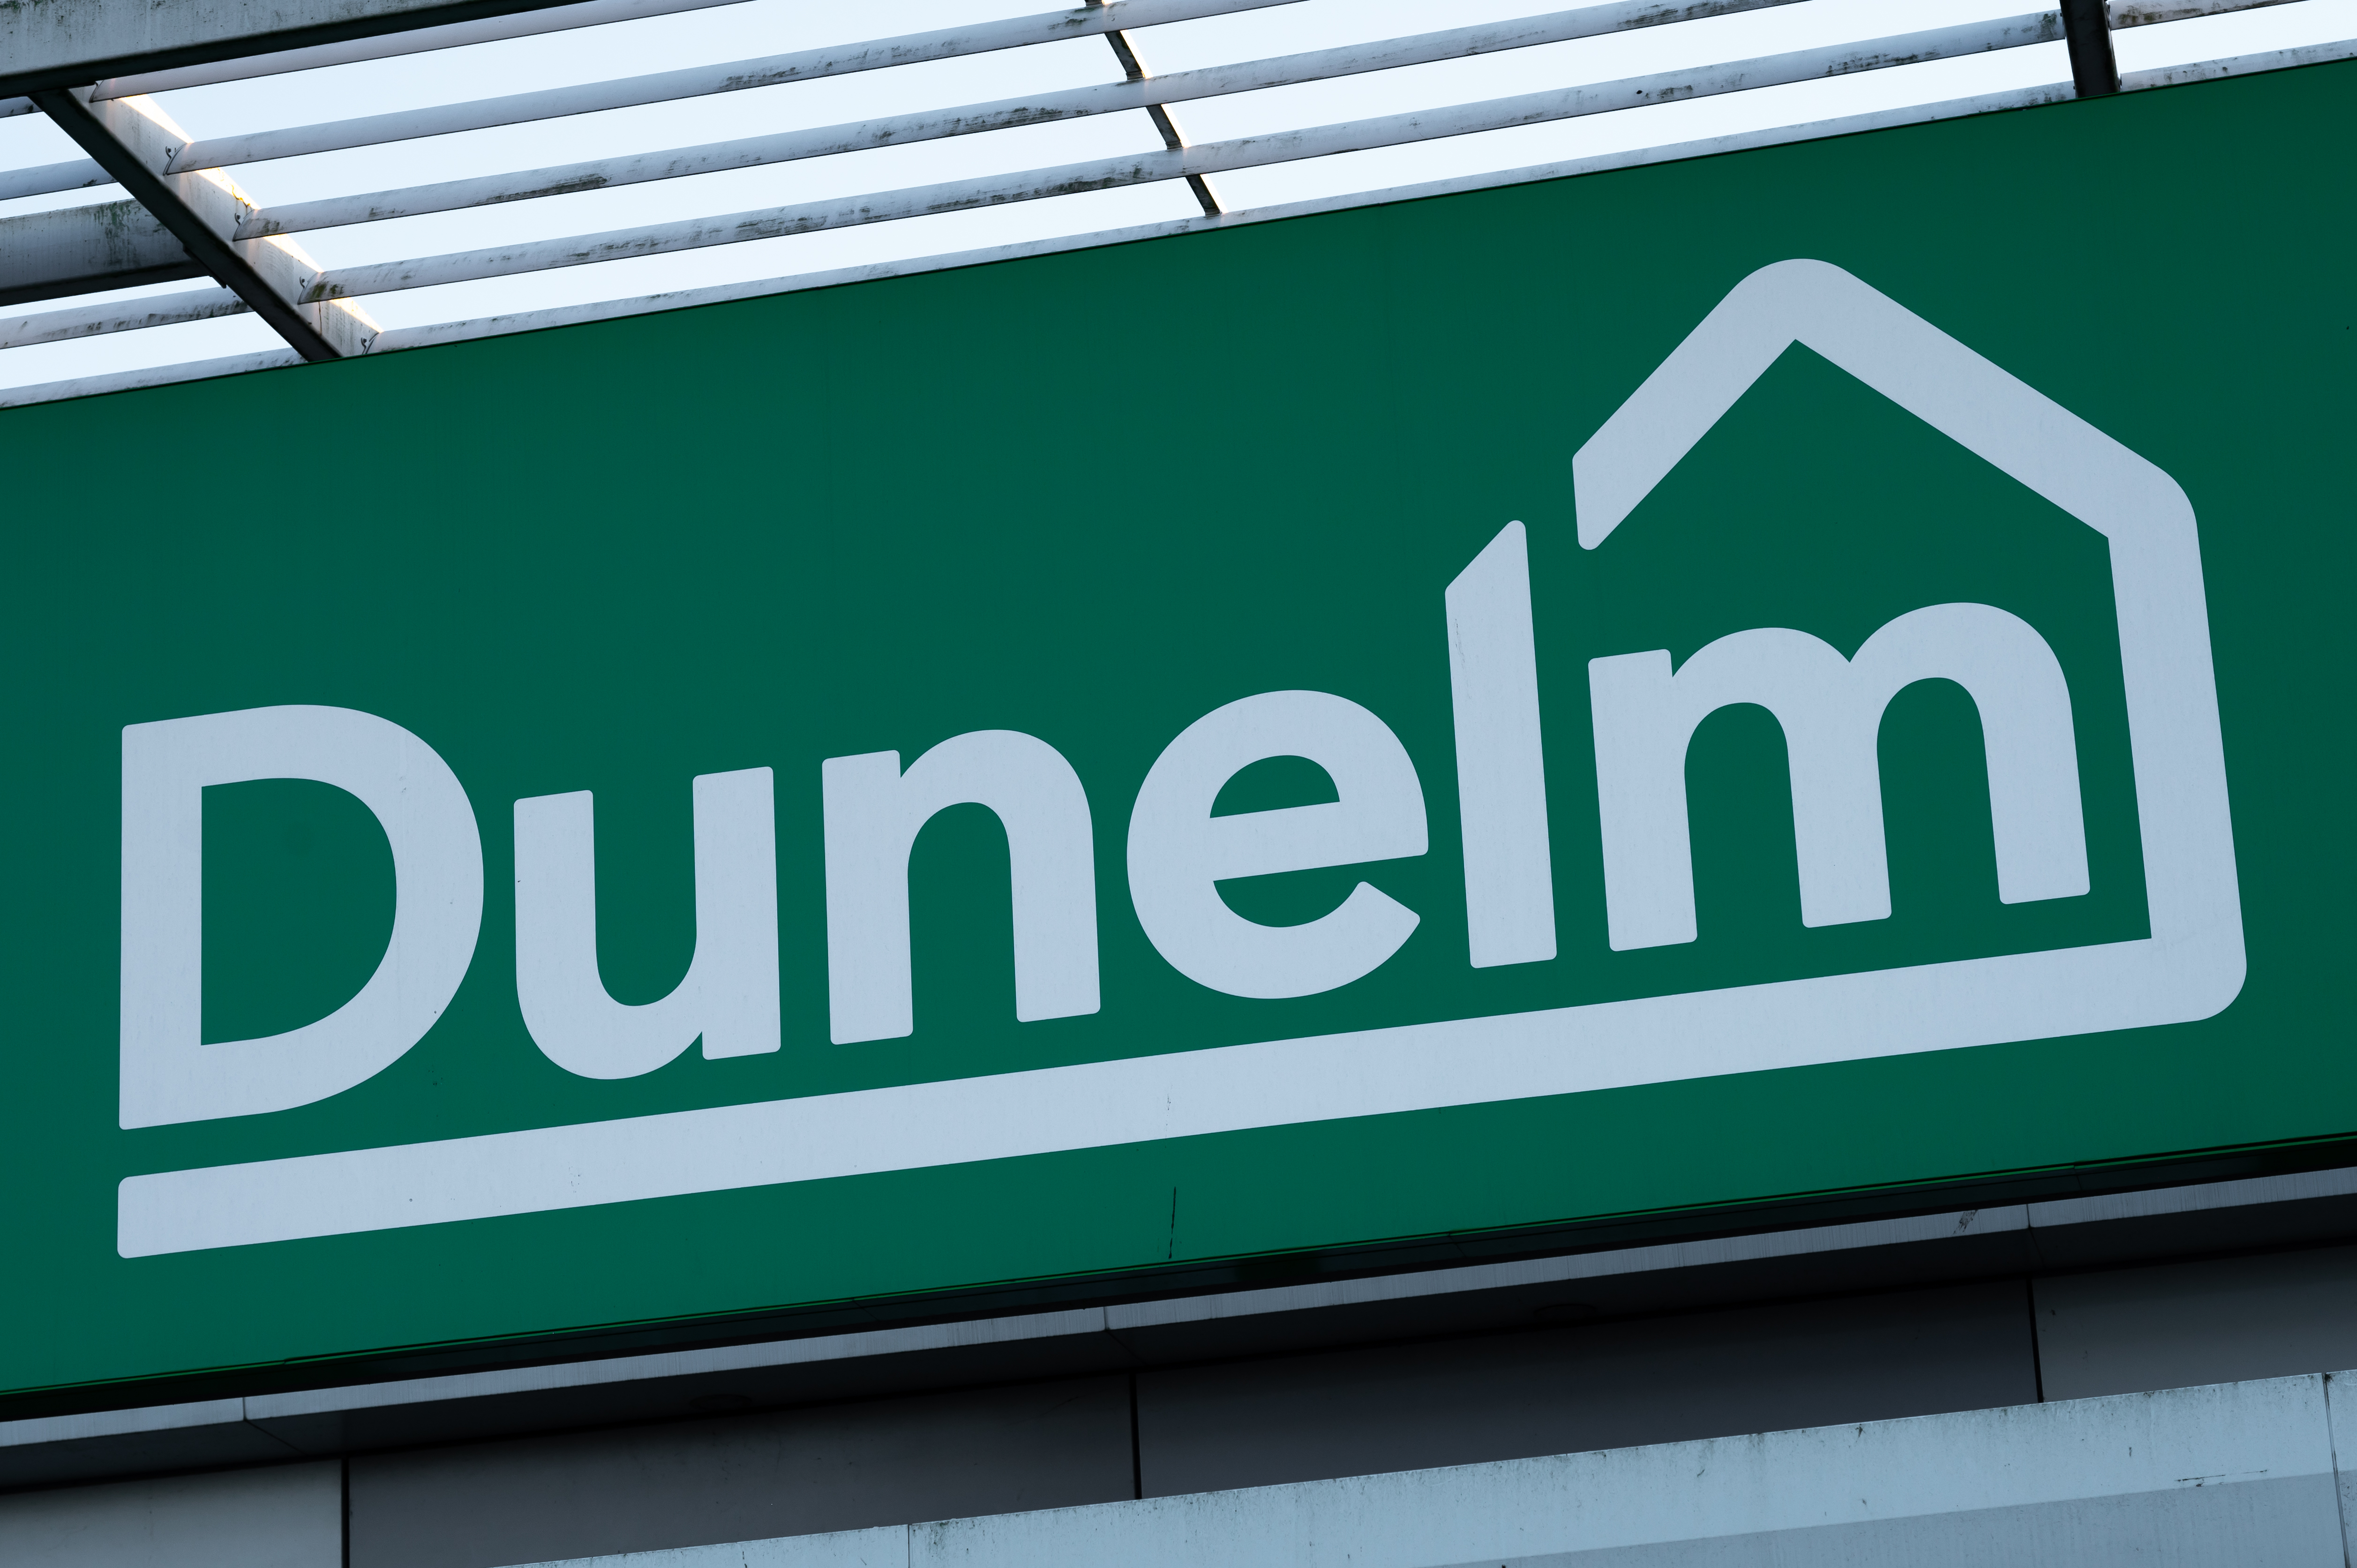 Dunelm shoppers filling baskets with item scanning at £17 instead of £185